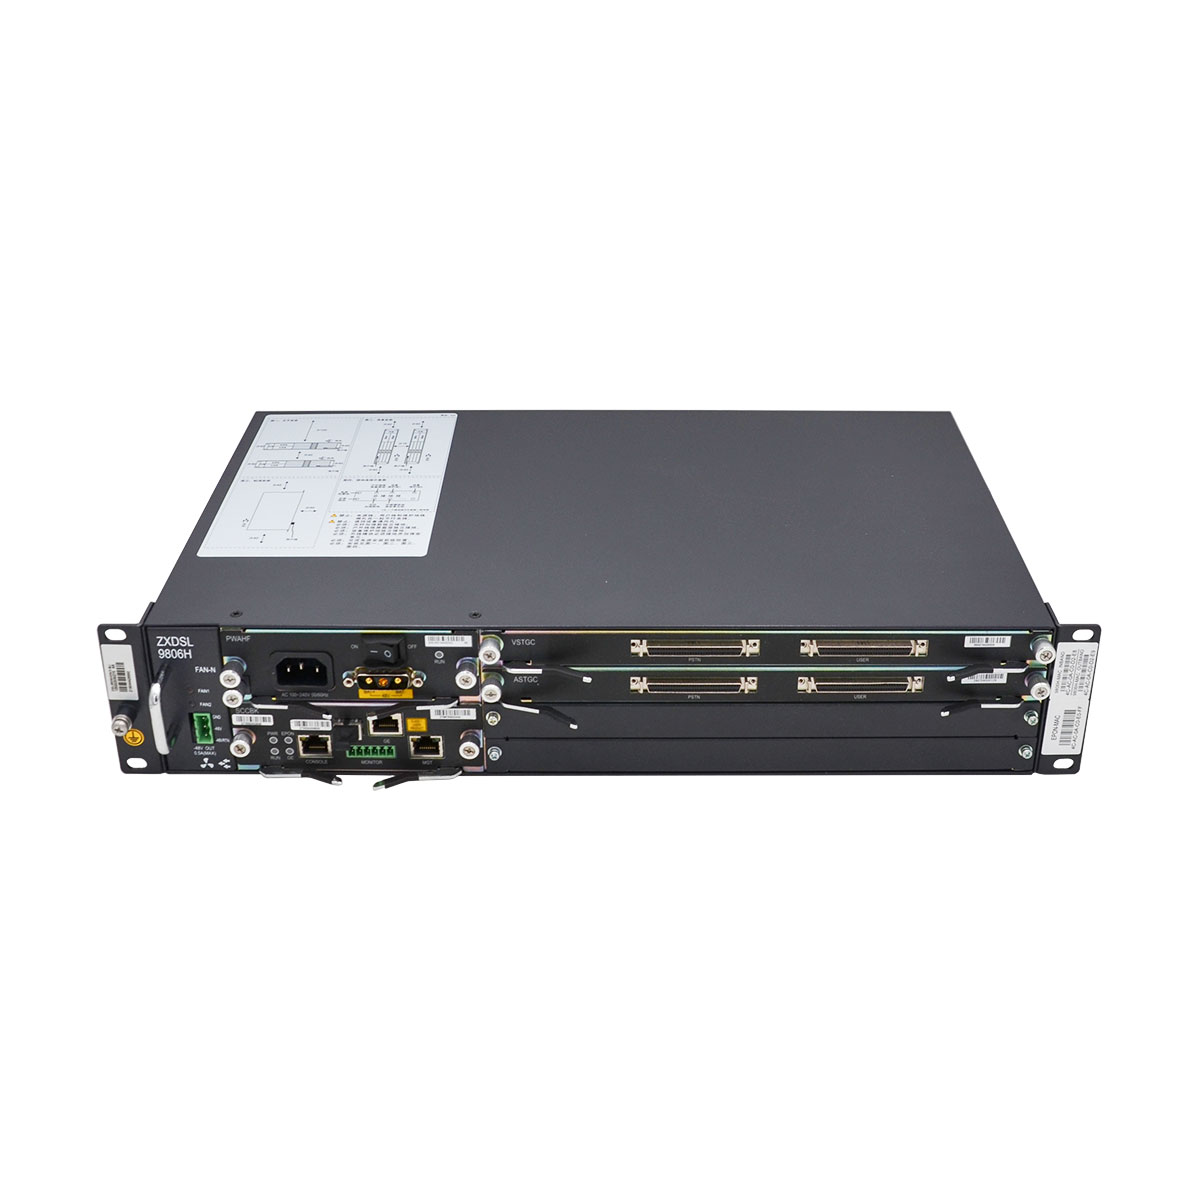 ZXDSL 9806H DSLAM Best Price At Telecomate.com